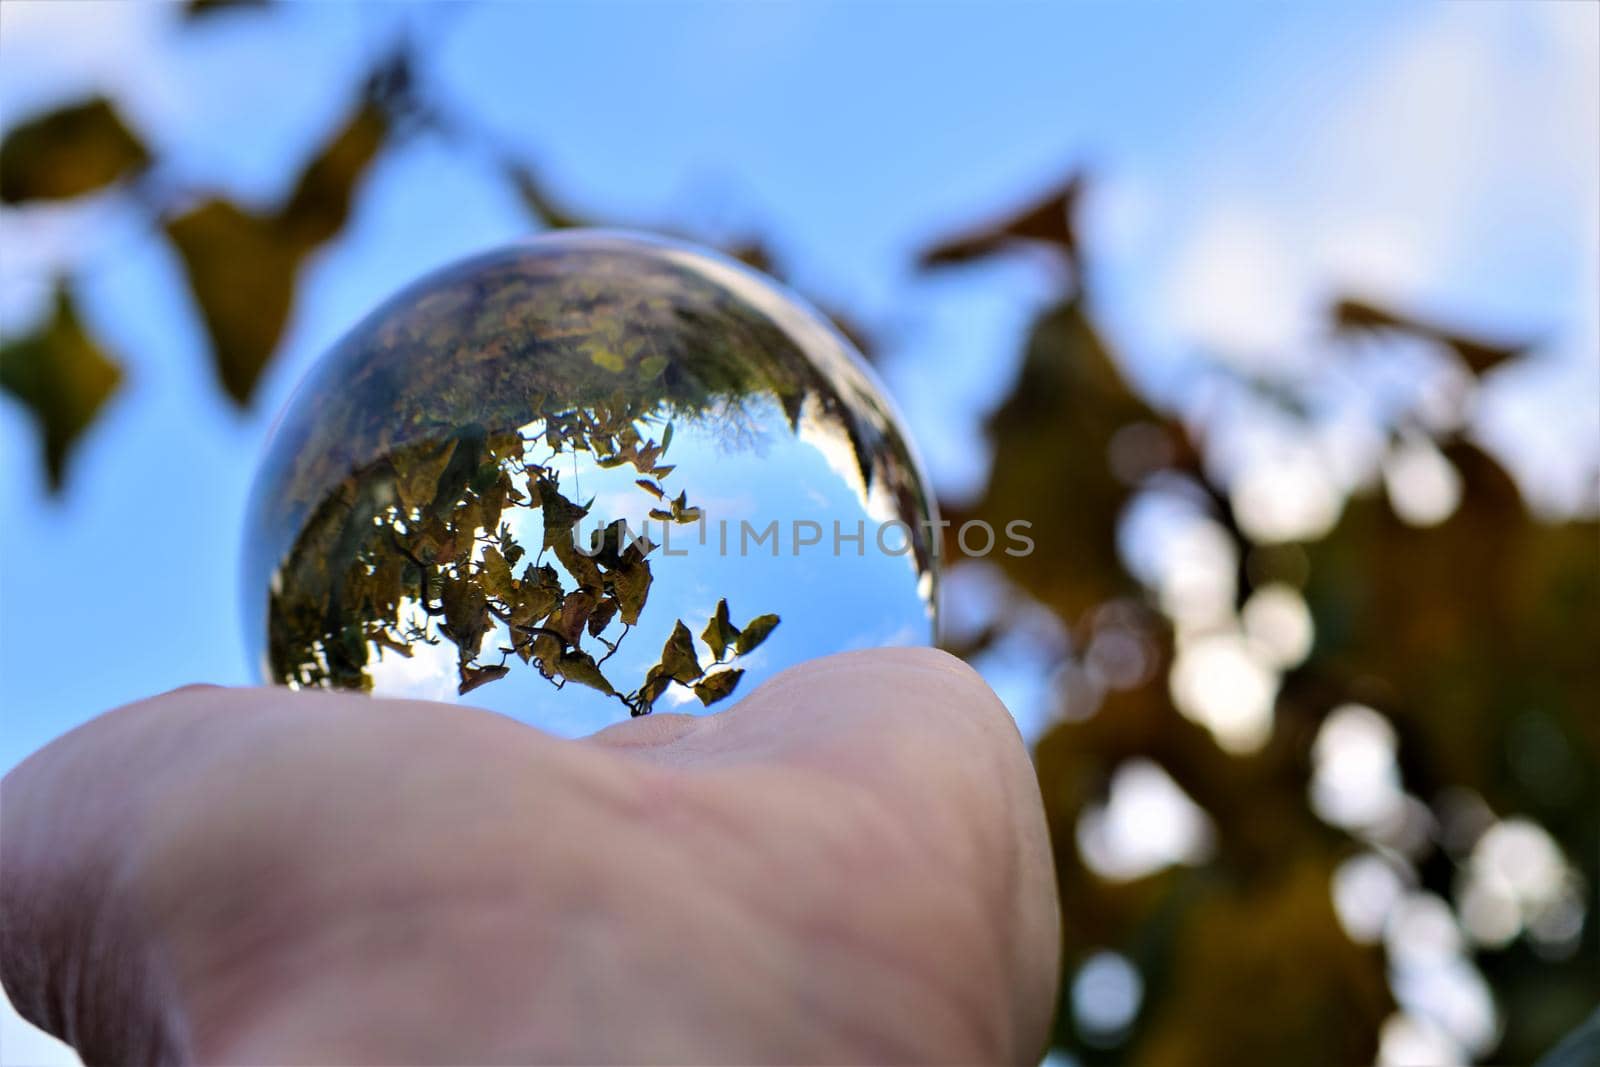 Sky and trees trough a lens ball on a hand against a blue sky and branches by Luise123